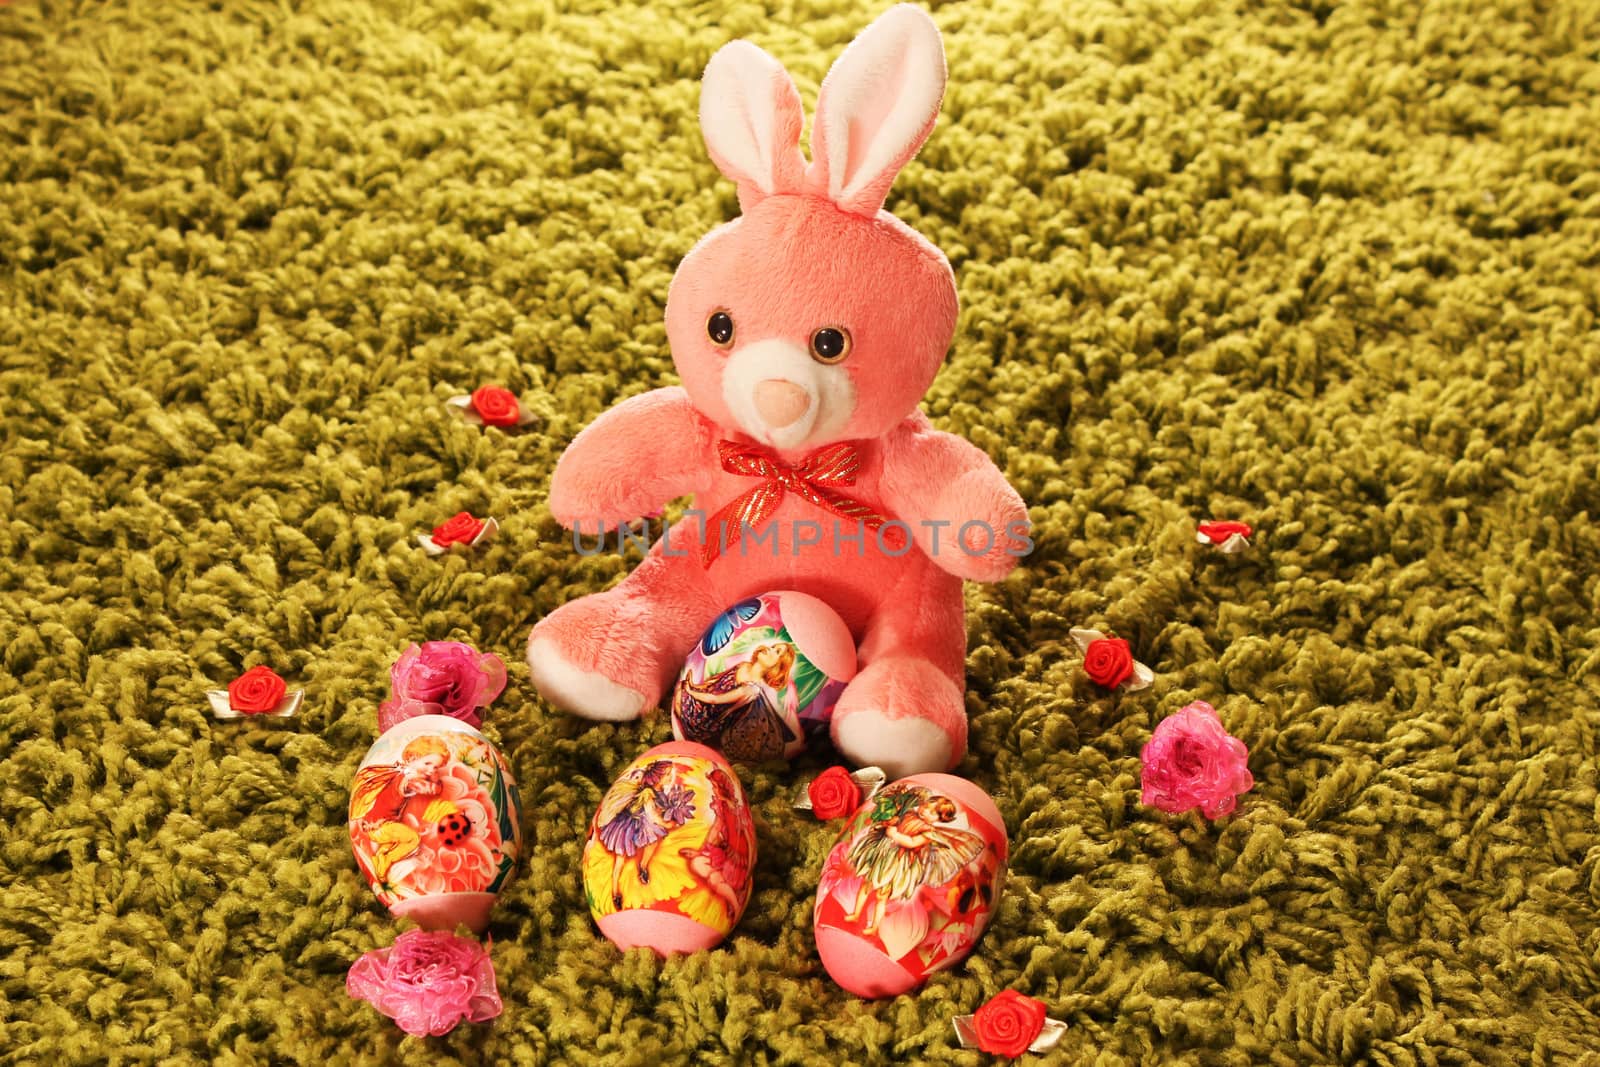 Easter eggs with pink toy rabbit placed on green synthetic grass with flowers